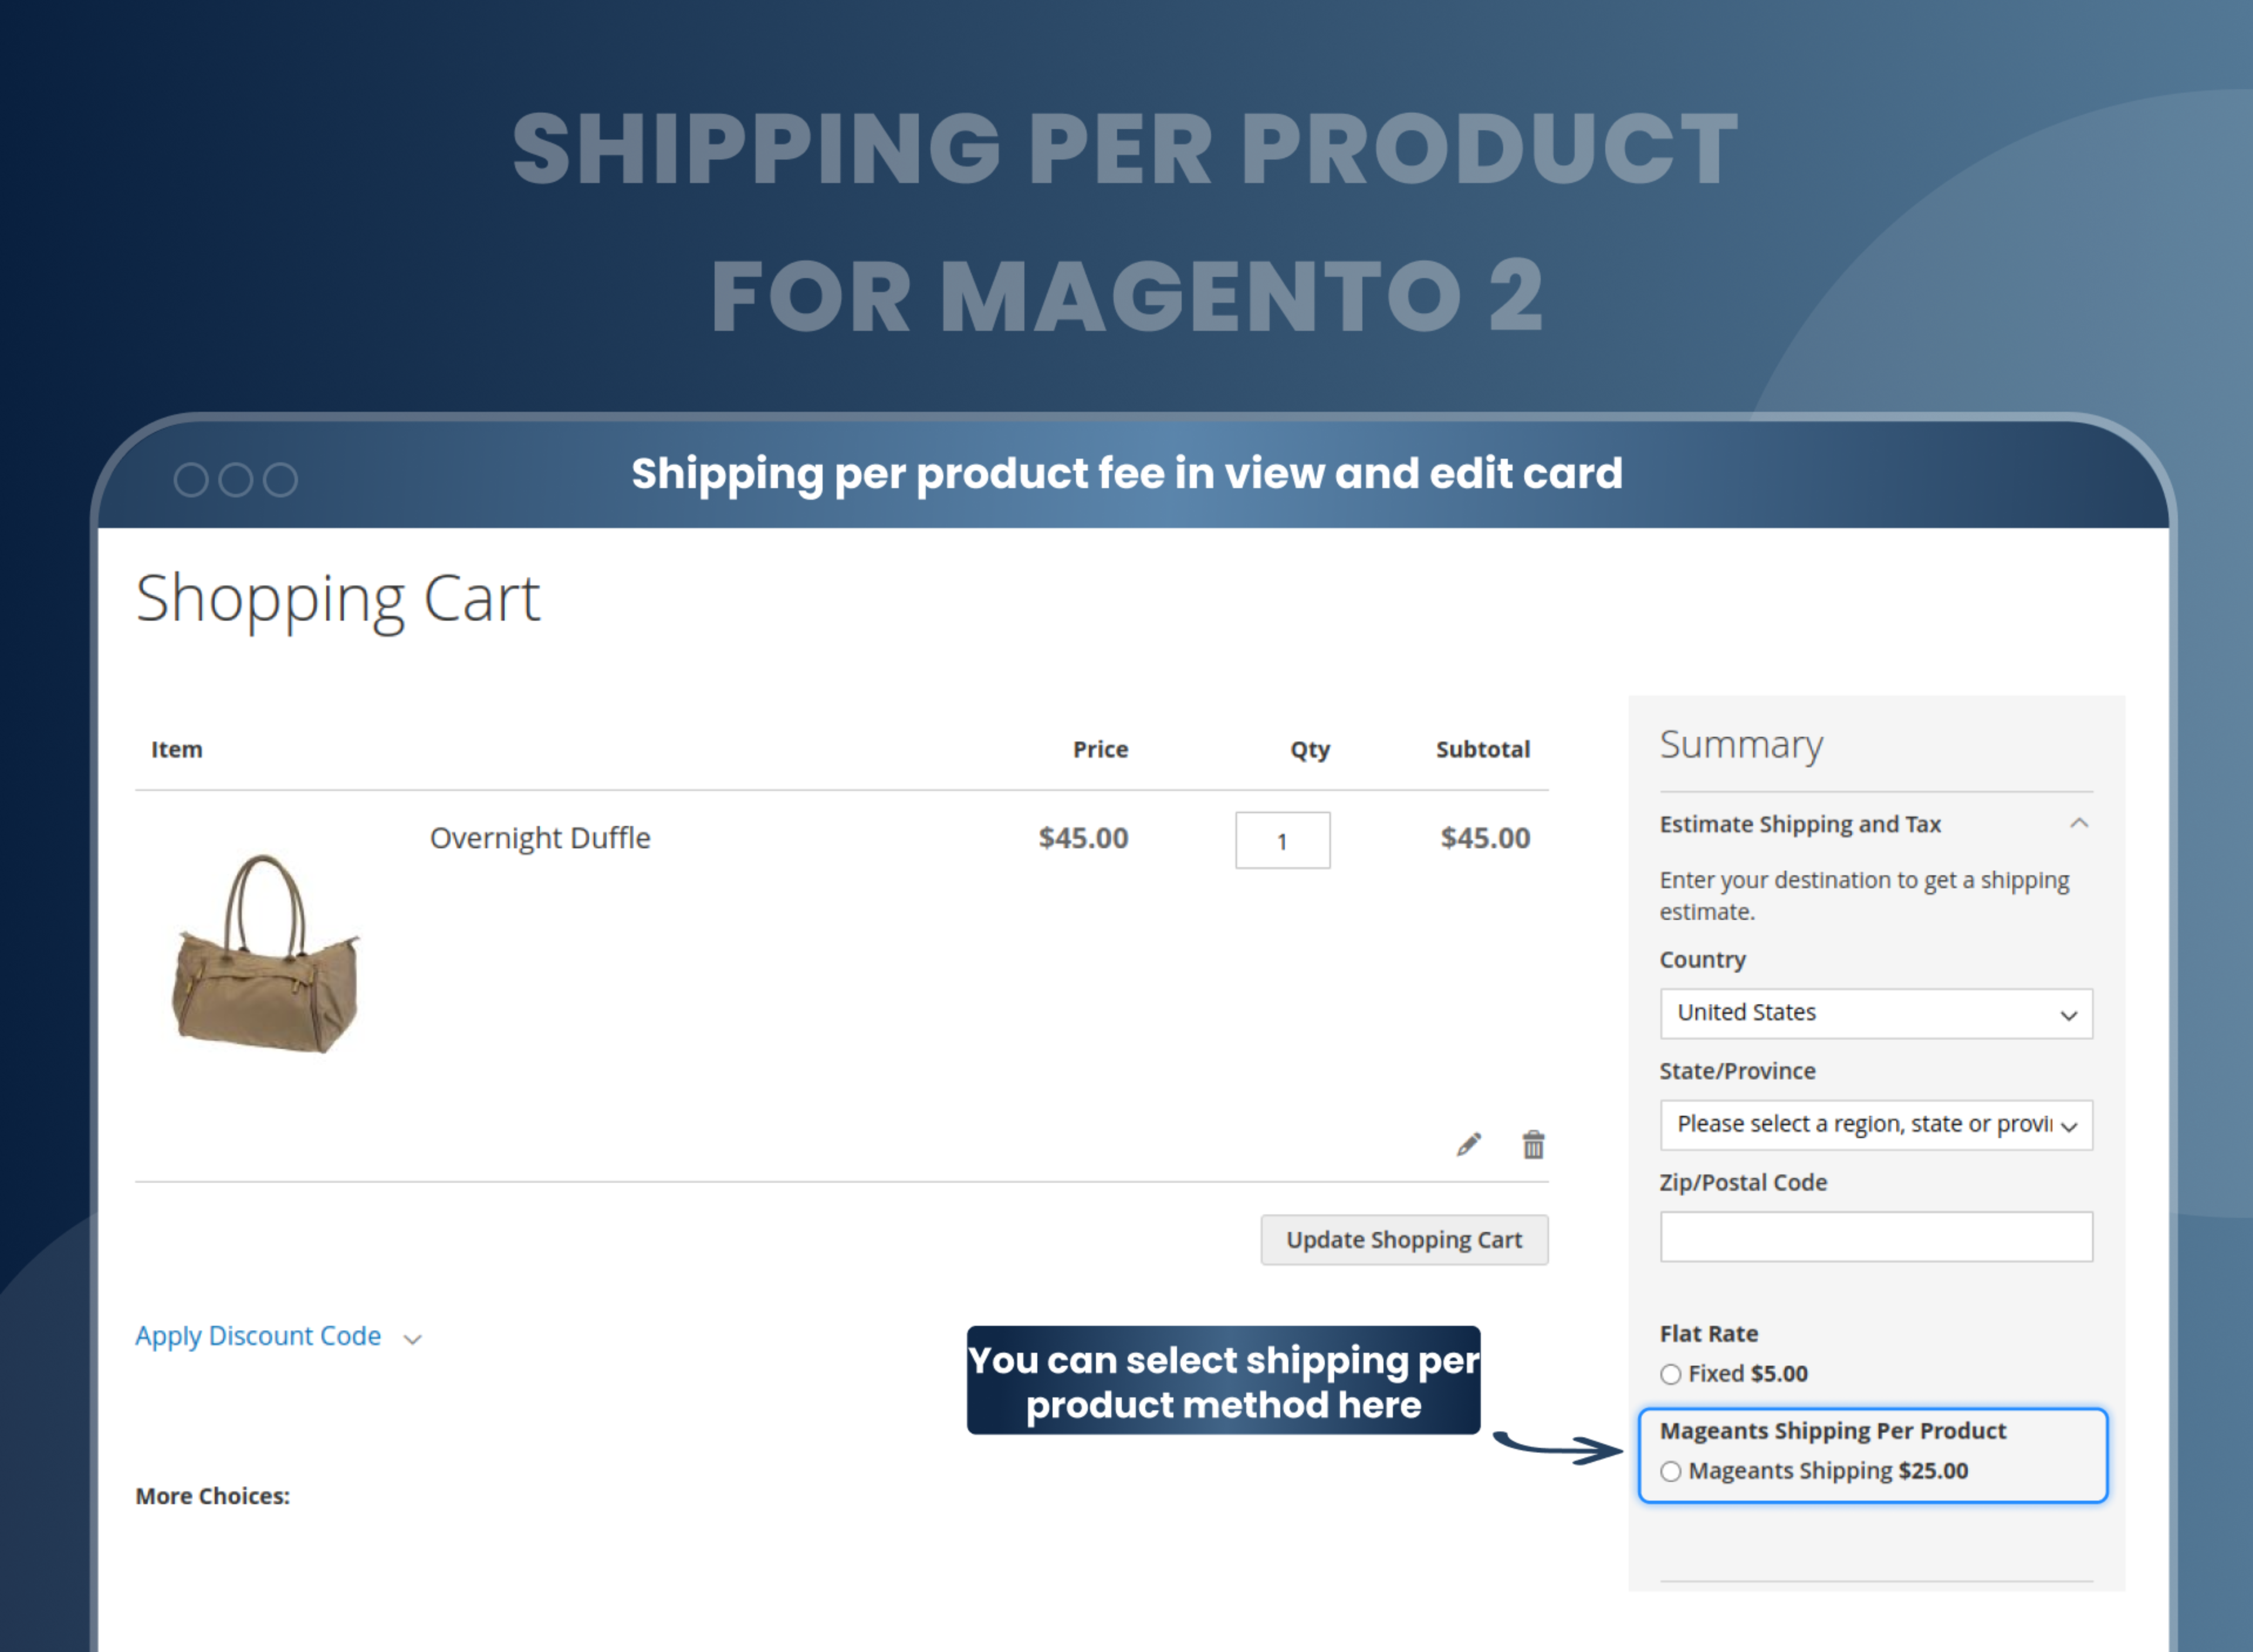 Shipping per product fee in view and edit card 